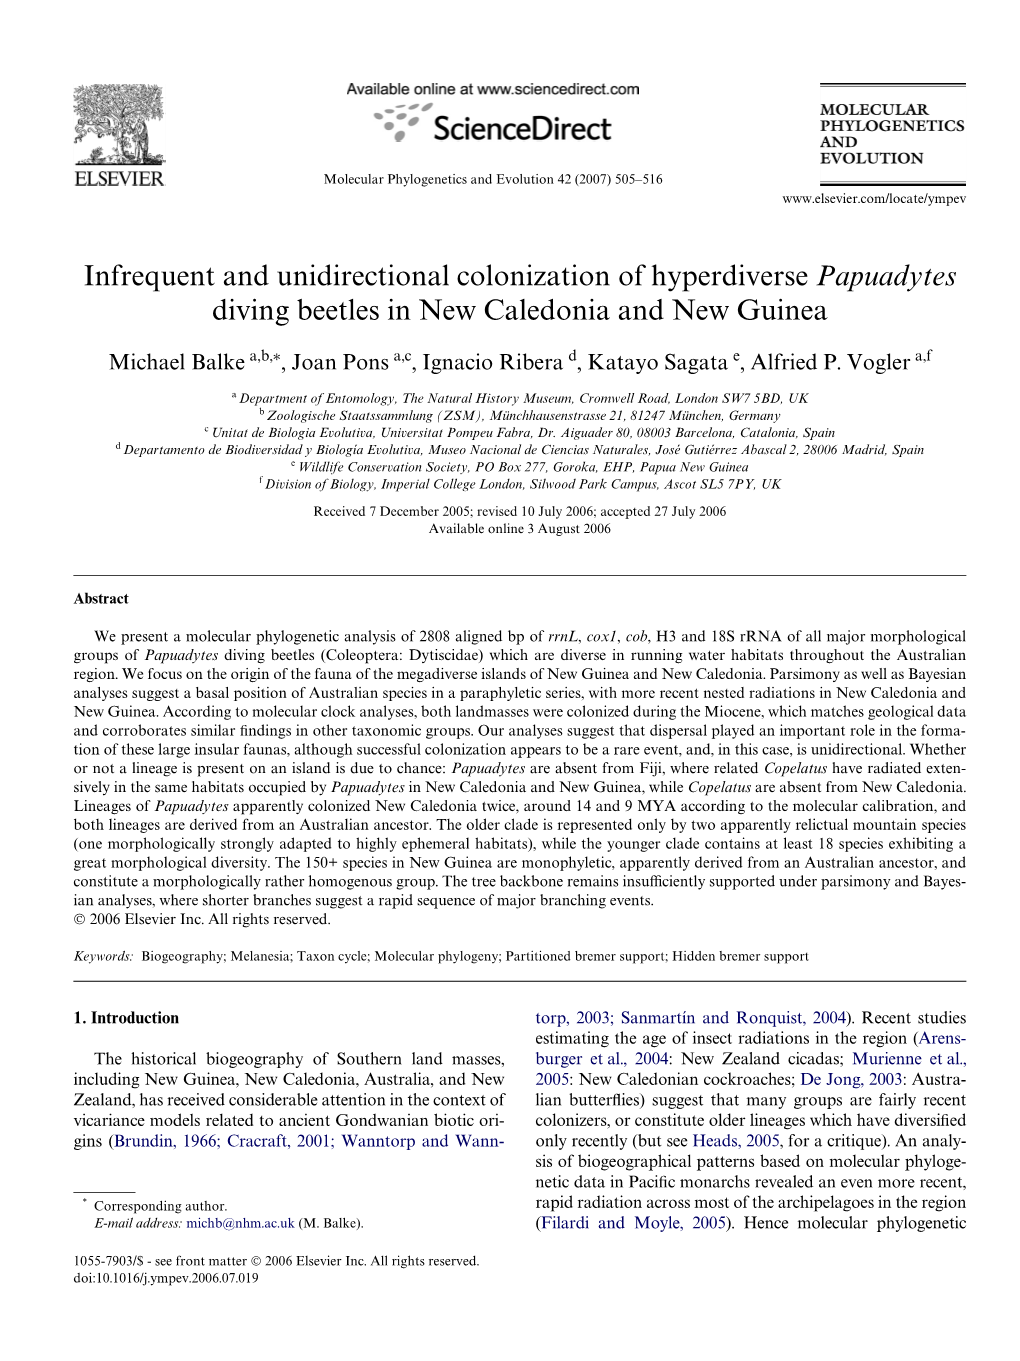 Infrequent and Unidirectional Colonization of Hyperdiverse Papuadytes Diving Beetles in New Caledonia and New Guinea